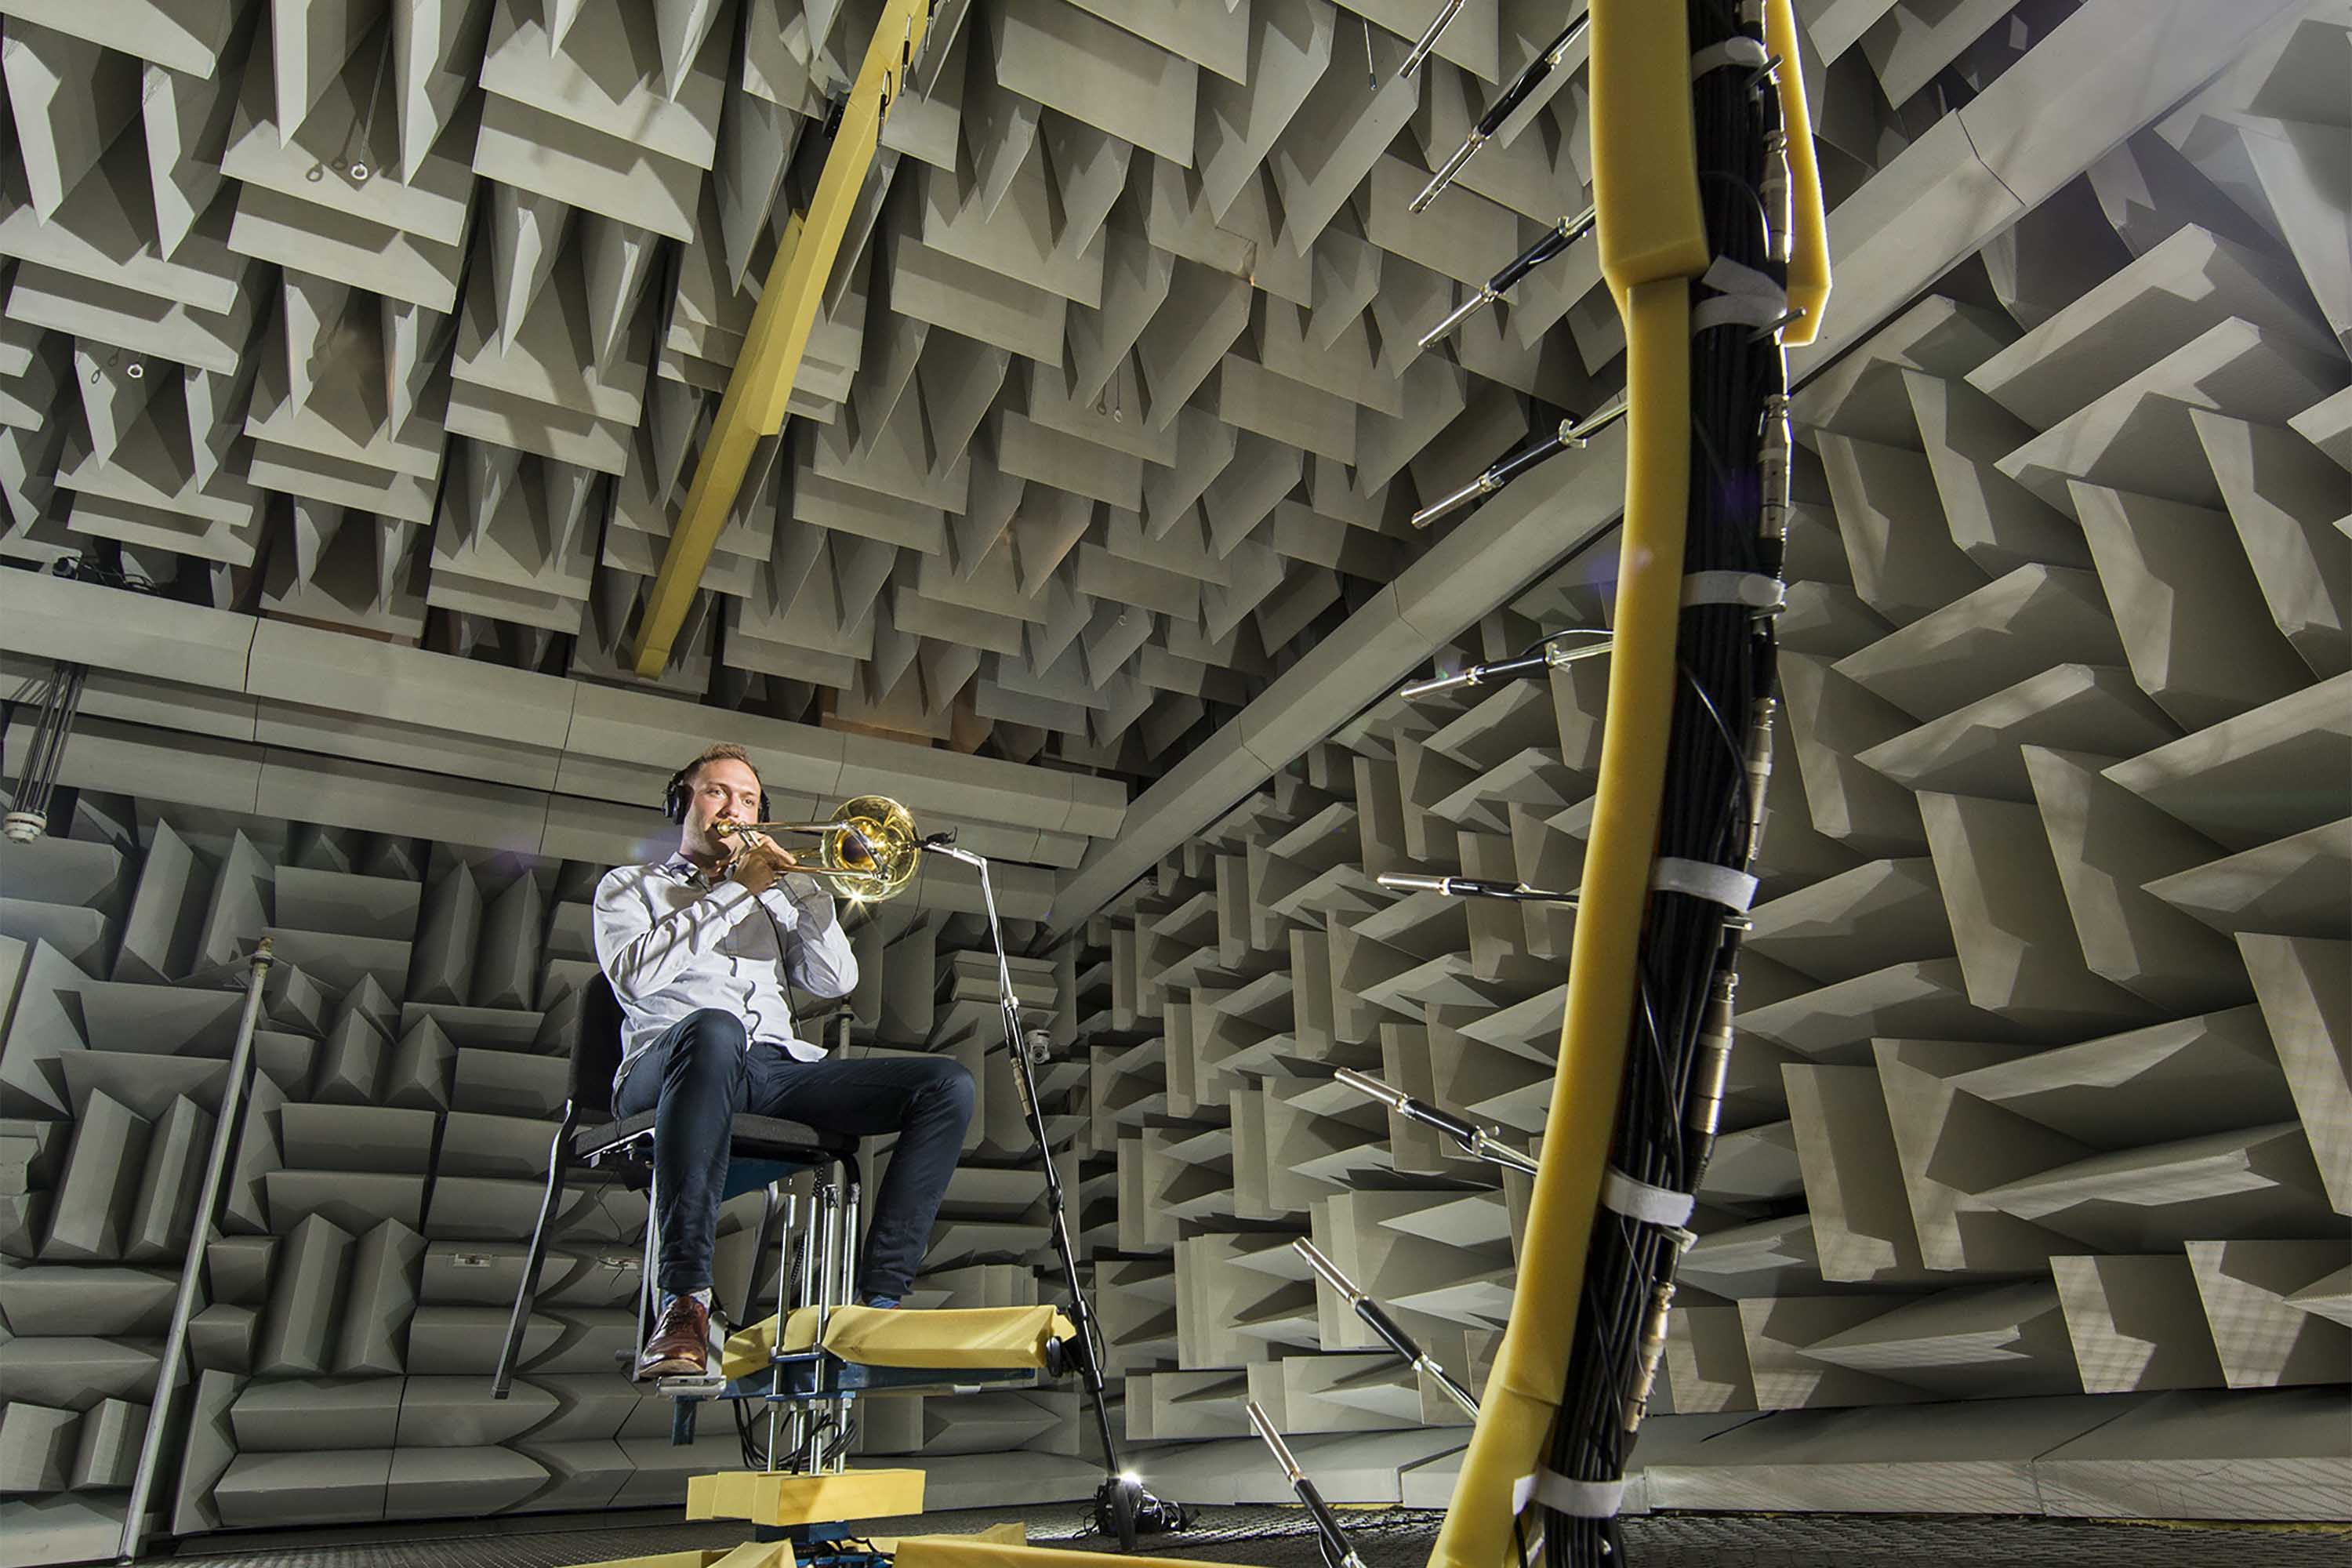 Trombone player in the anechoic chamber